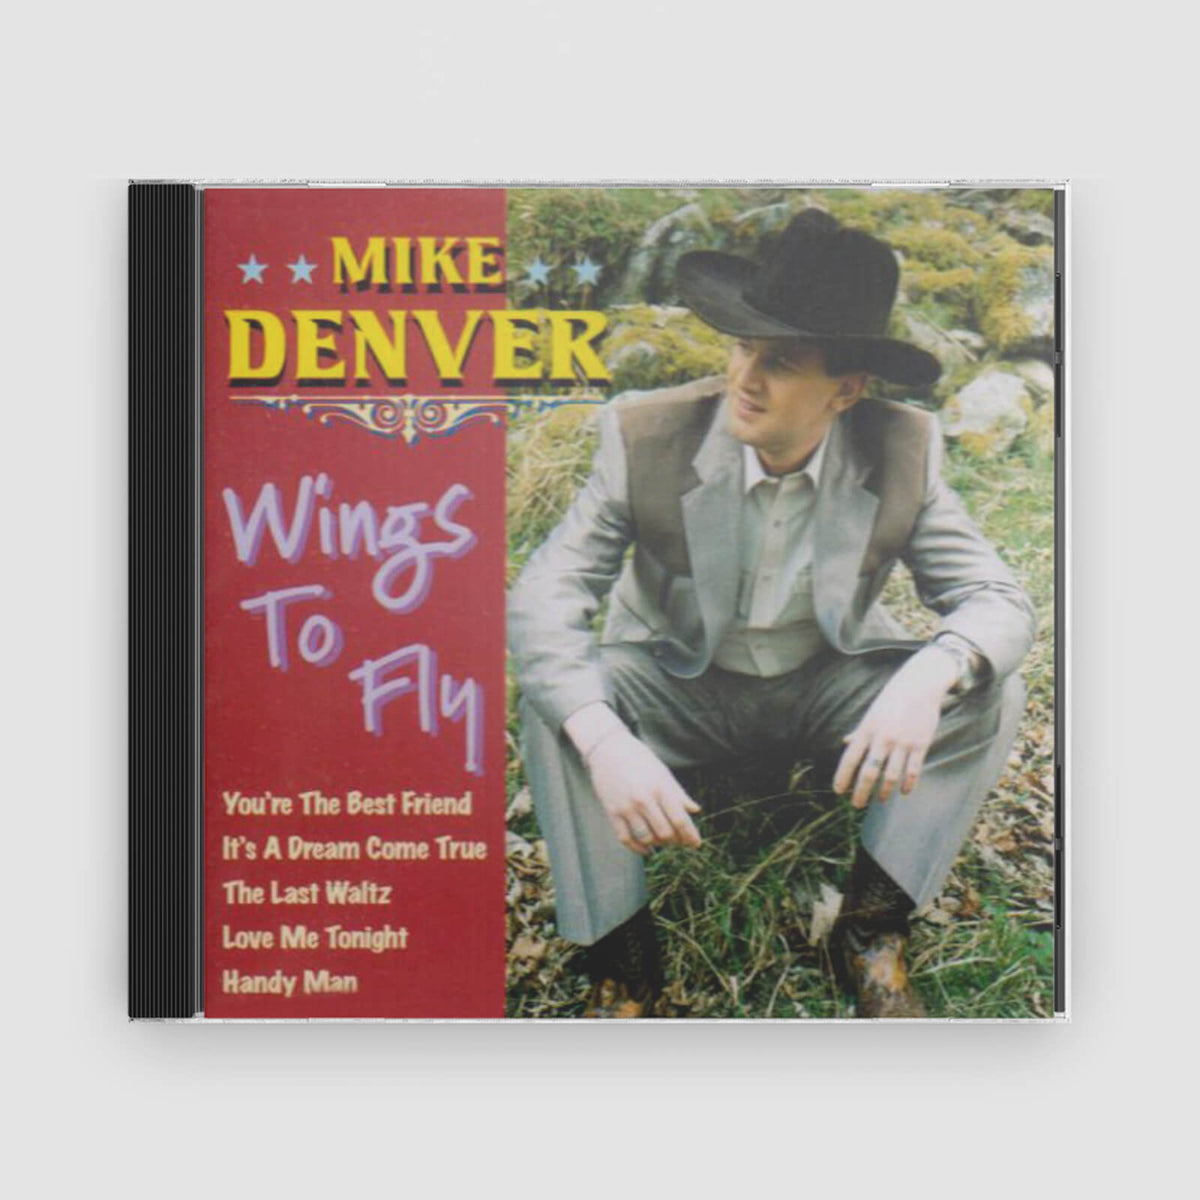 Mike Denver : Wings to Fly